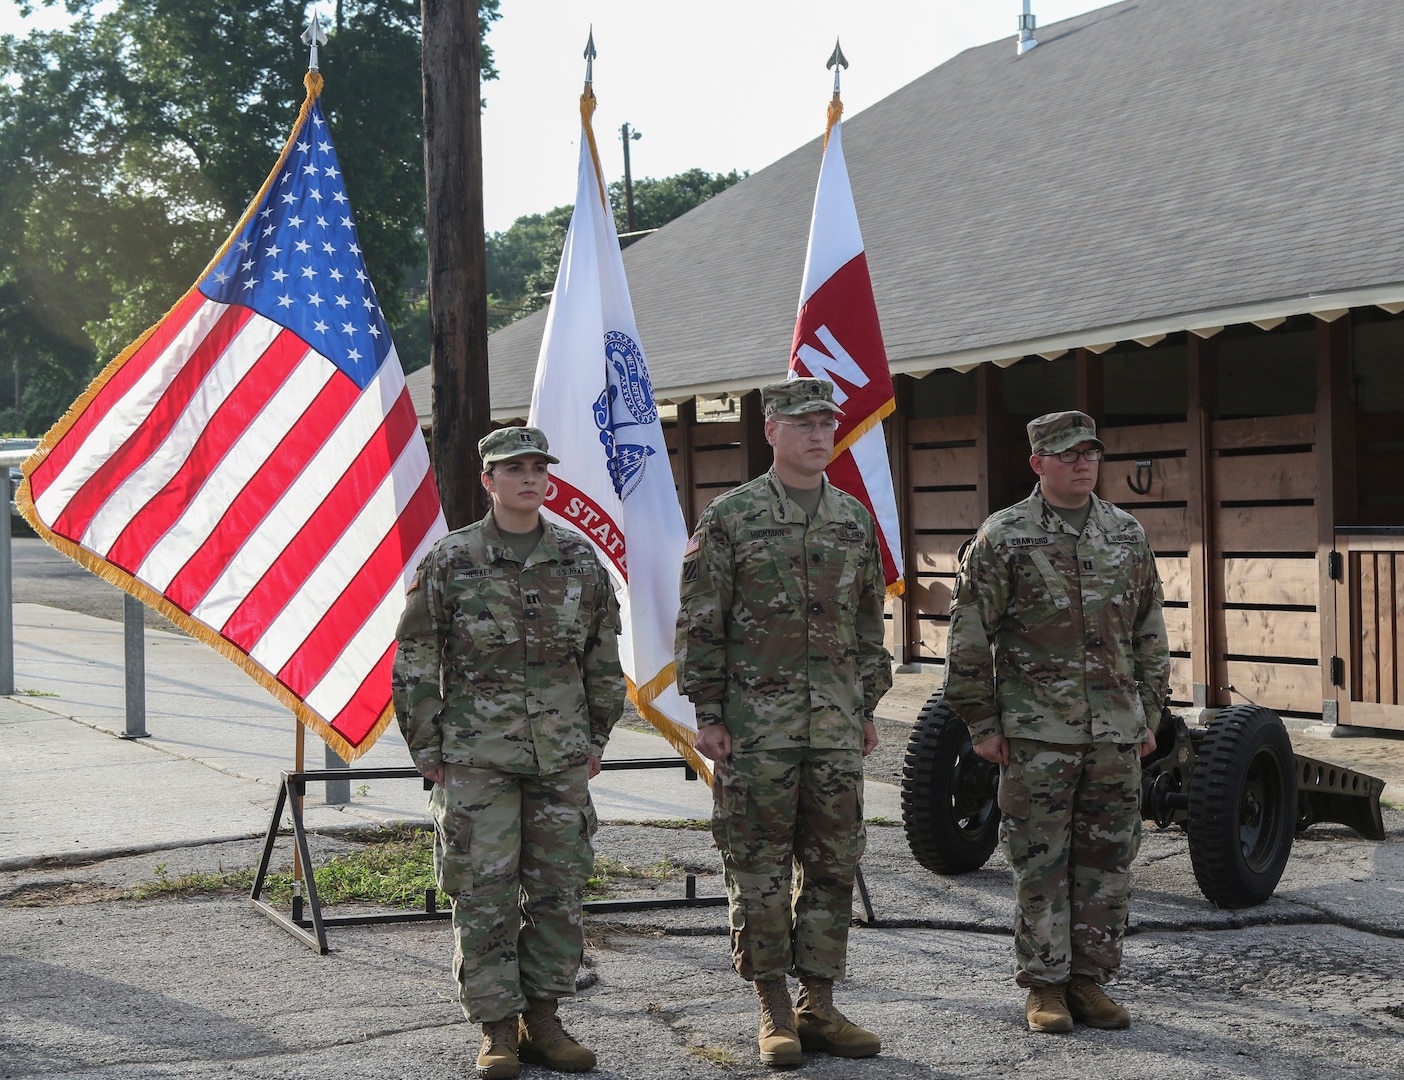 Lt. Col. Timothy Hickman (center), U.S. Army North Headquarters and Headquarters Battalion commander, stands at attention with Capt. Adam C. Crawford (right), outgoing commander for the ARNORTH Headquarters Support Company, and Capt. Stephanie E. Hecker (left), incoming commander for HSC, after the passing of the guidon during a change of command ceremony at the Joint Base San Antonio-Fort Sam Houston stables June 3. The change of command ceremony represents the passing of responsibilities for a unit from the outgoing commander to the incoming commander.